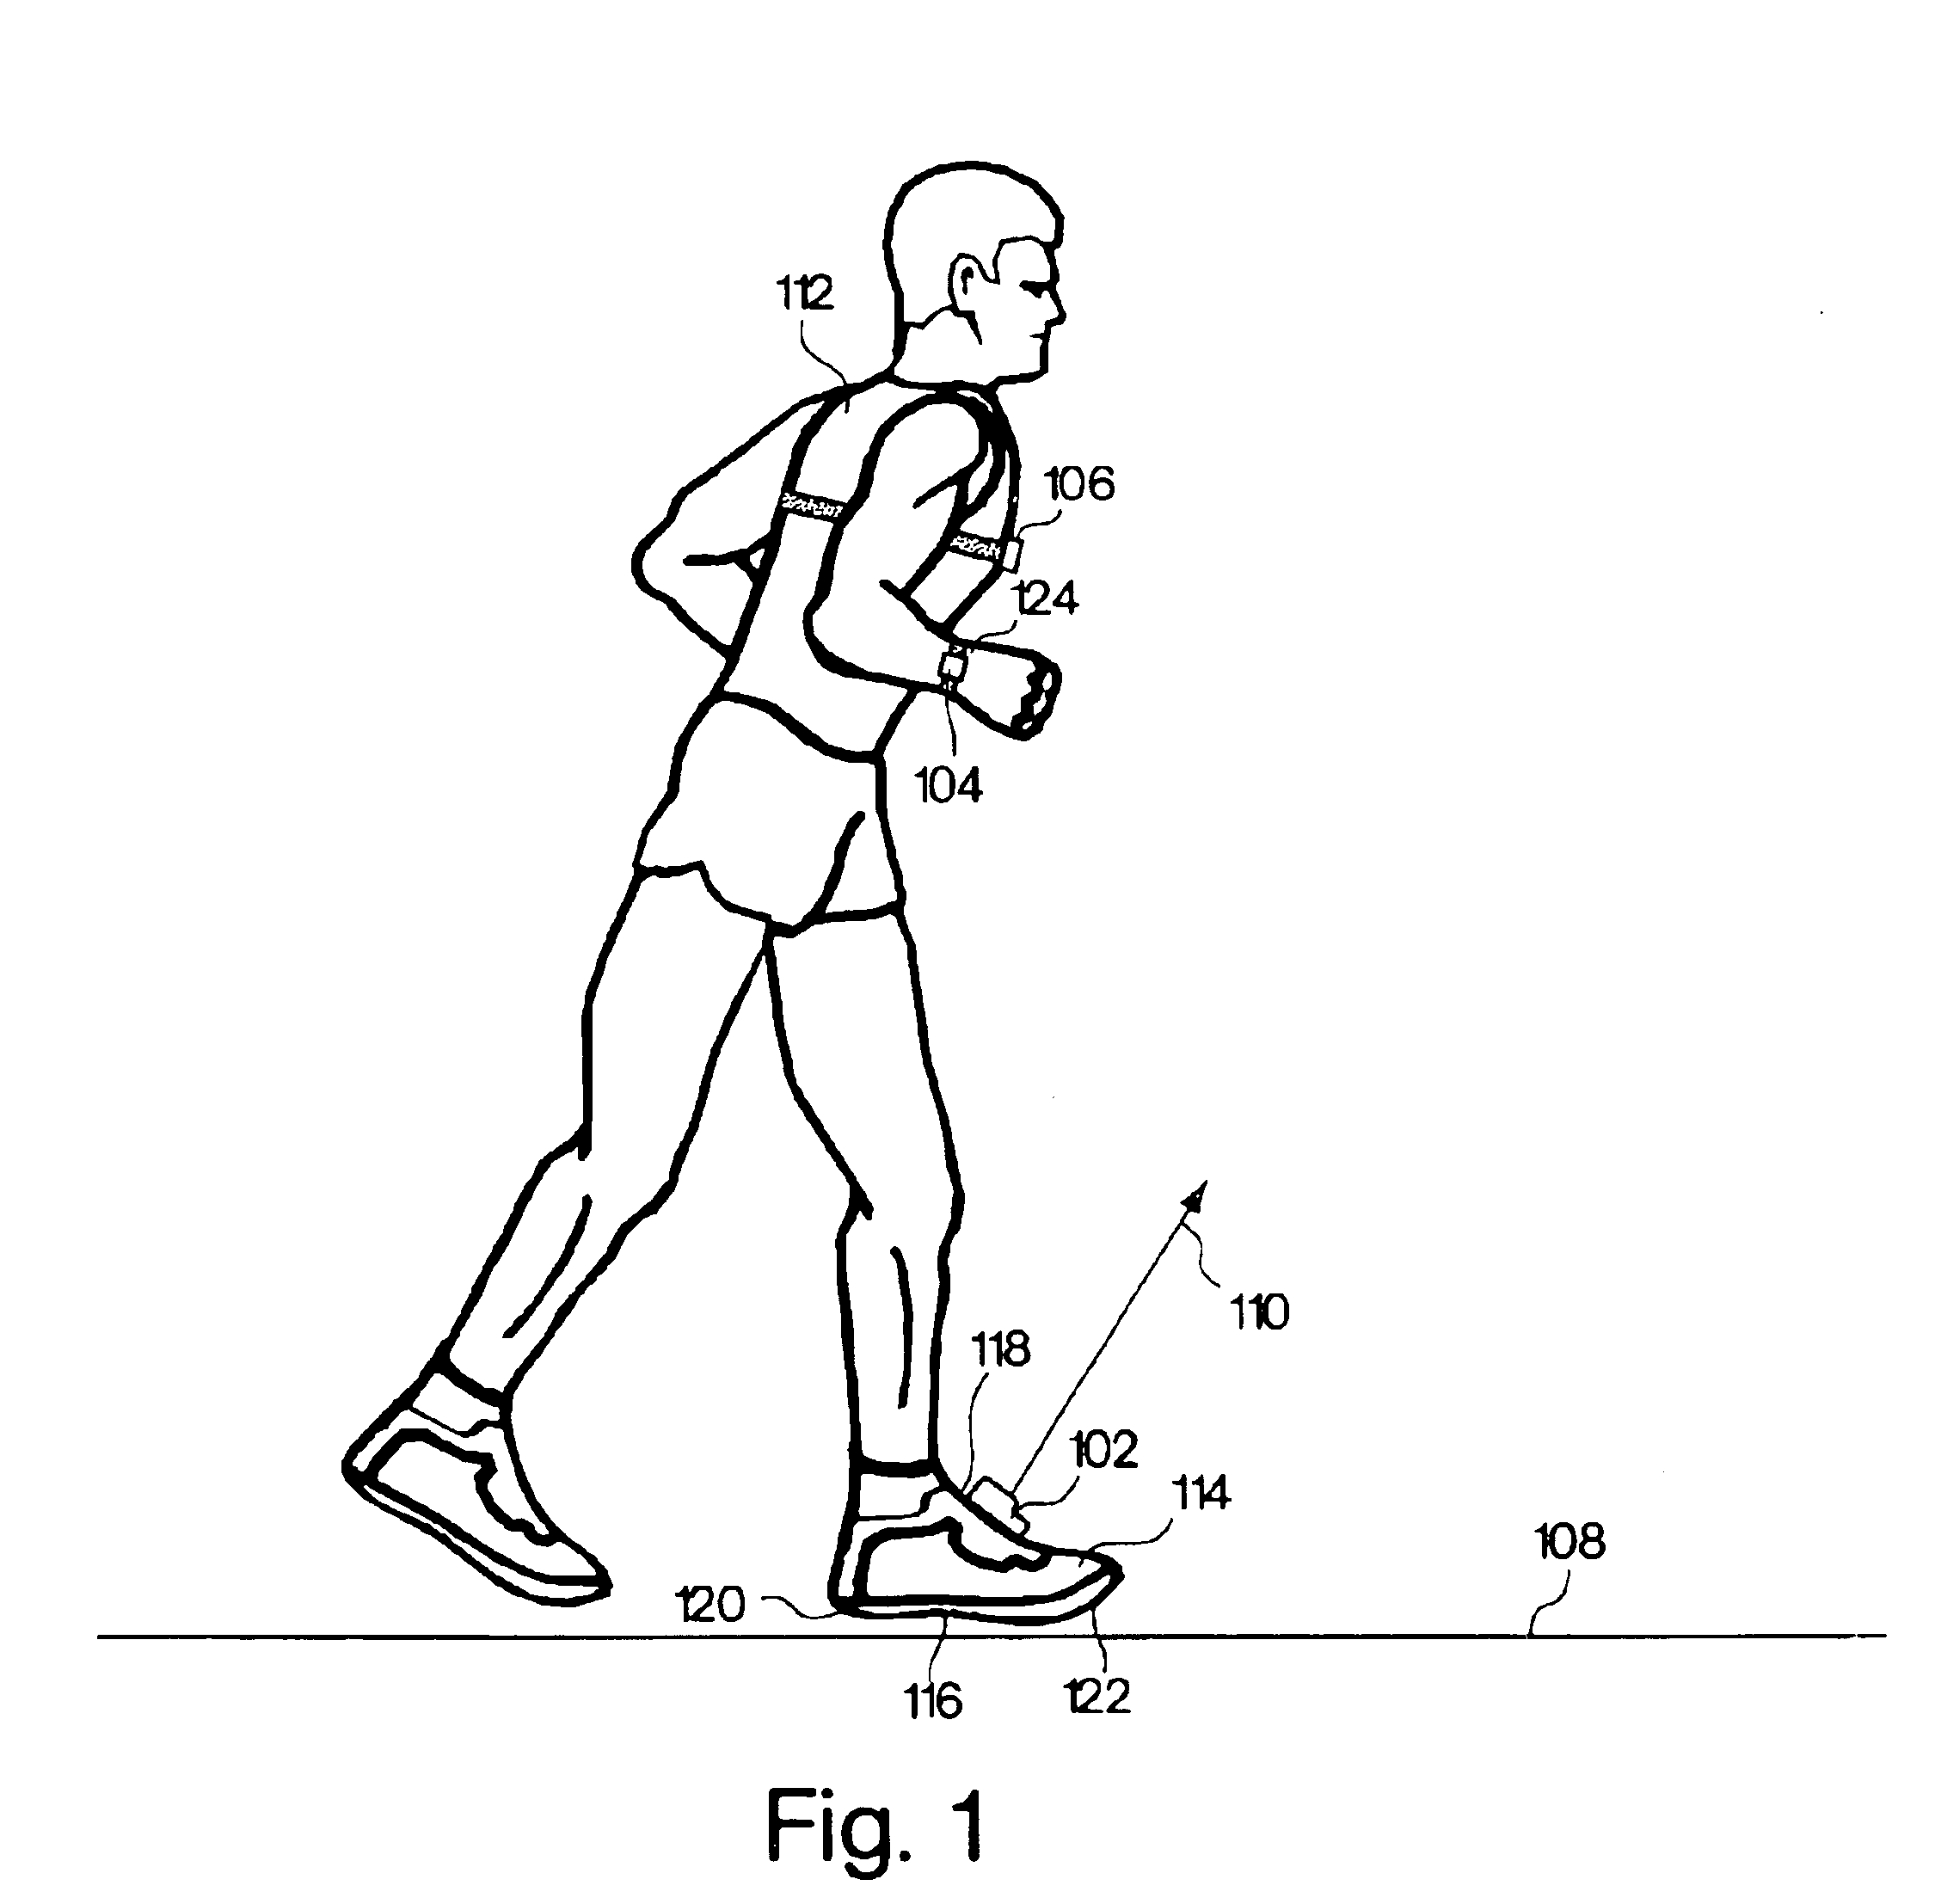 Monitoring activity of a user in locomotion on foot